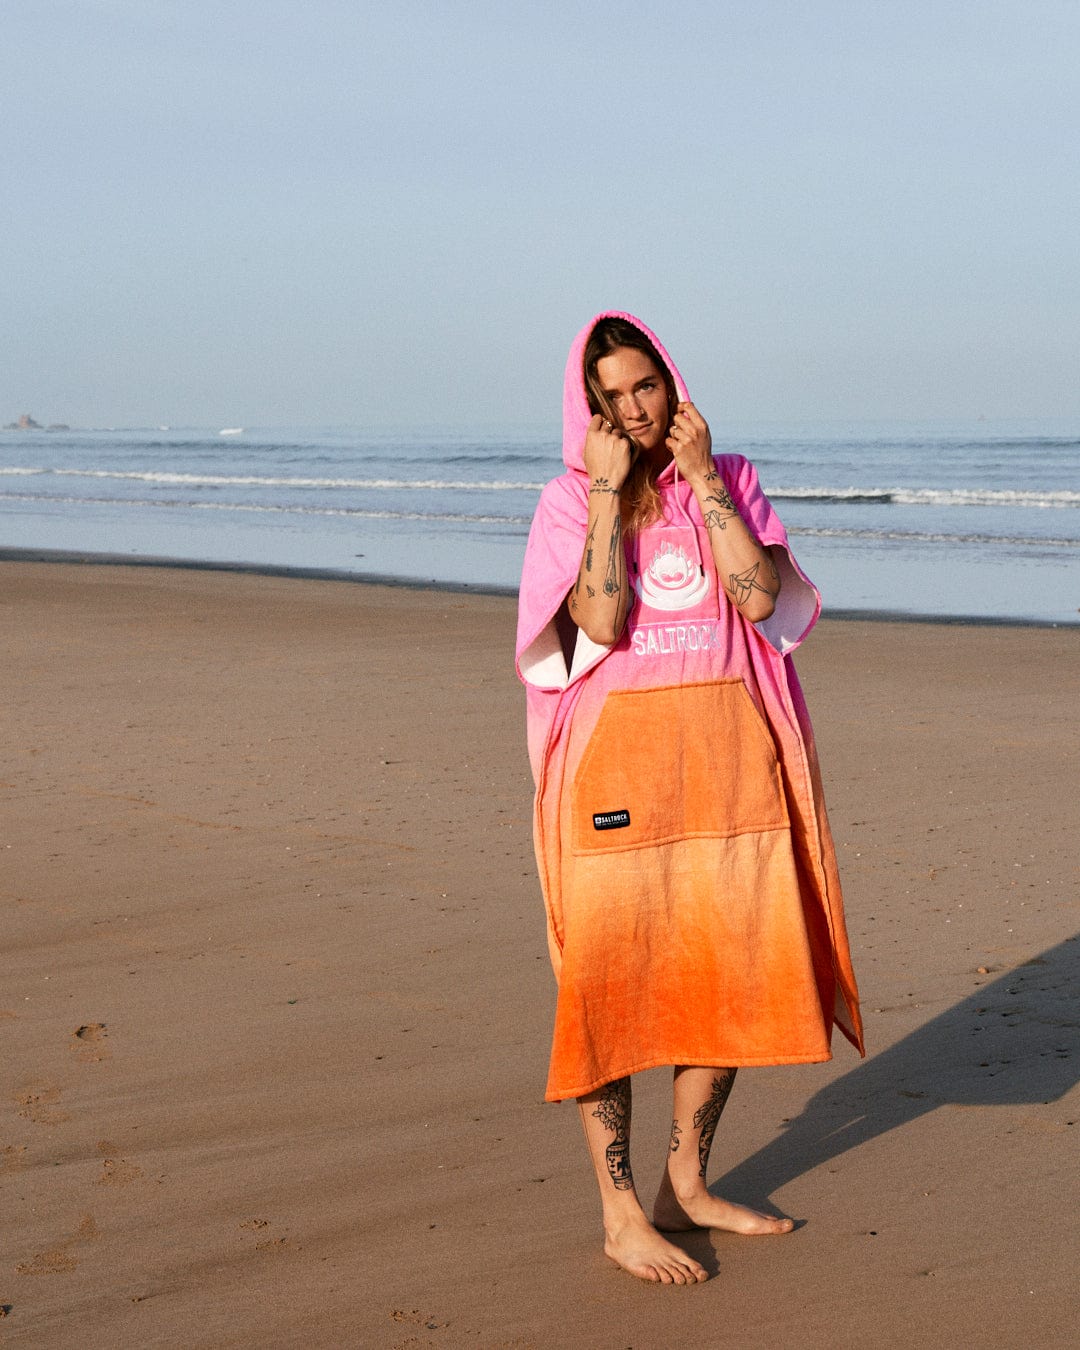 A person in a pink hoodie and a Saltrock Tropic Dip - Changing Towel - Pink/Orange stands barefoot on a sandy beach, touching their hood, with waves in the background.